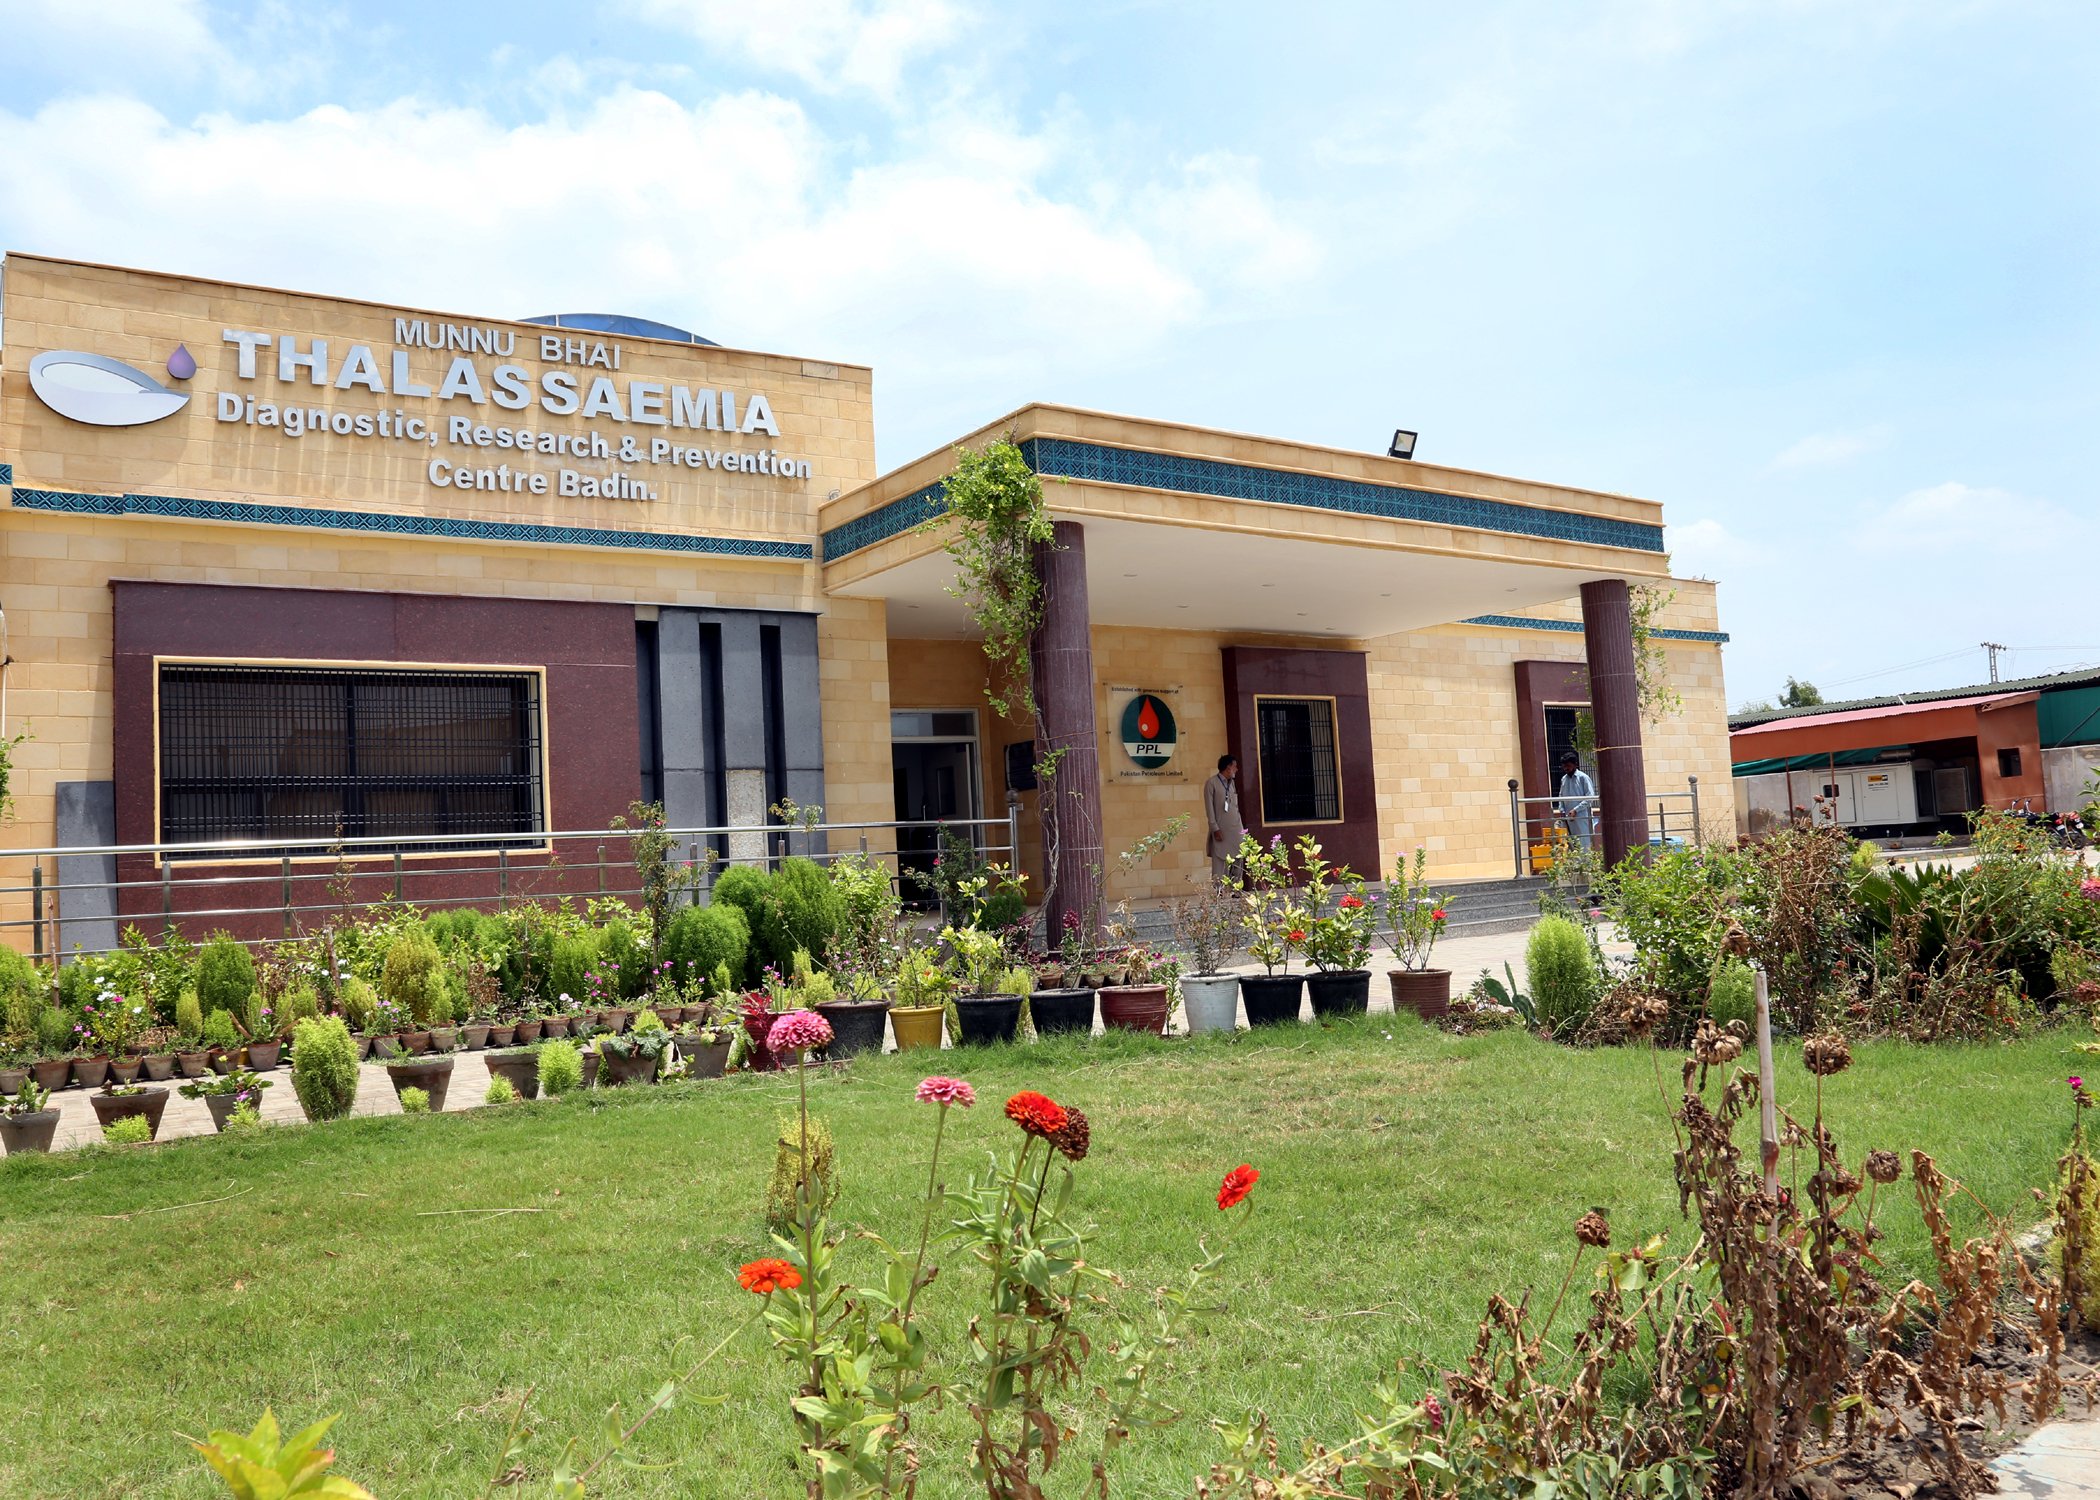 Thalassemia Diagnostic Prevention & Research Center Badin constructed and furnished by PPL